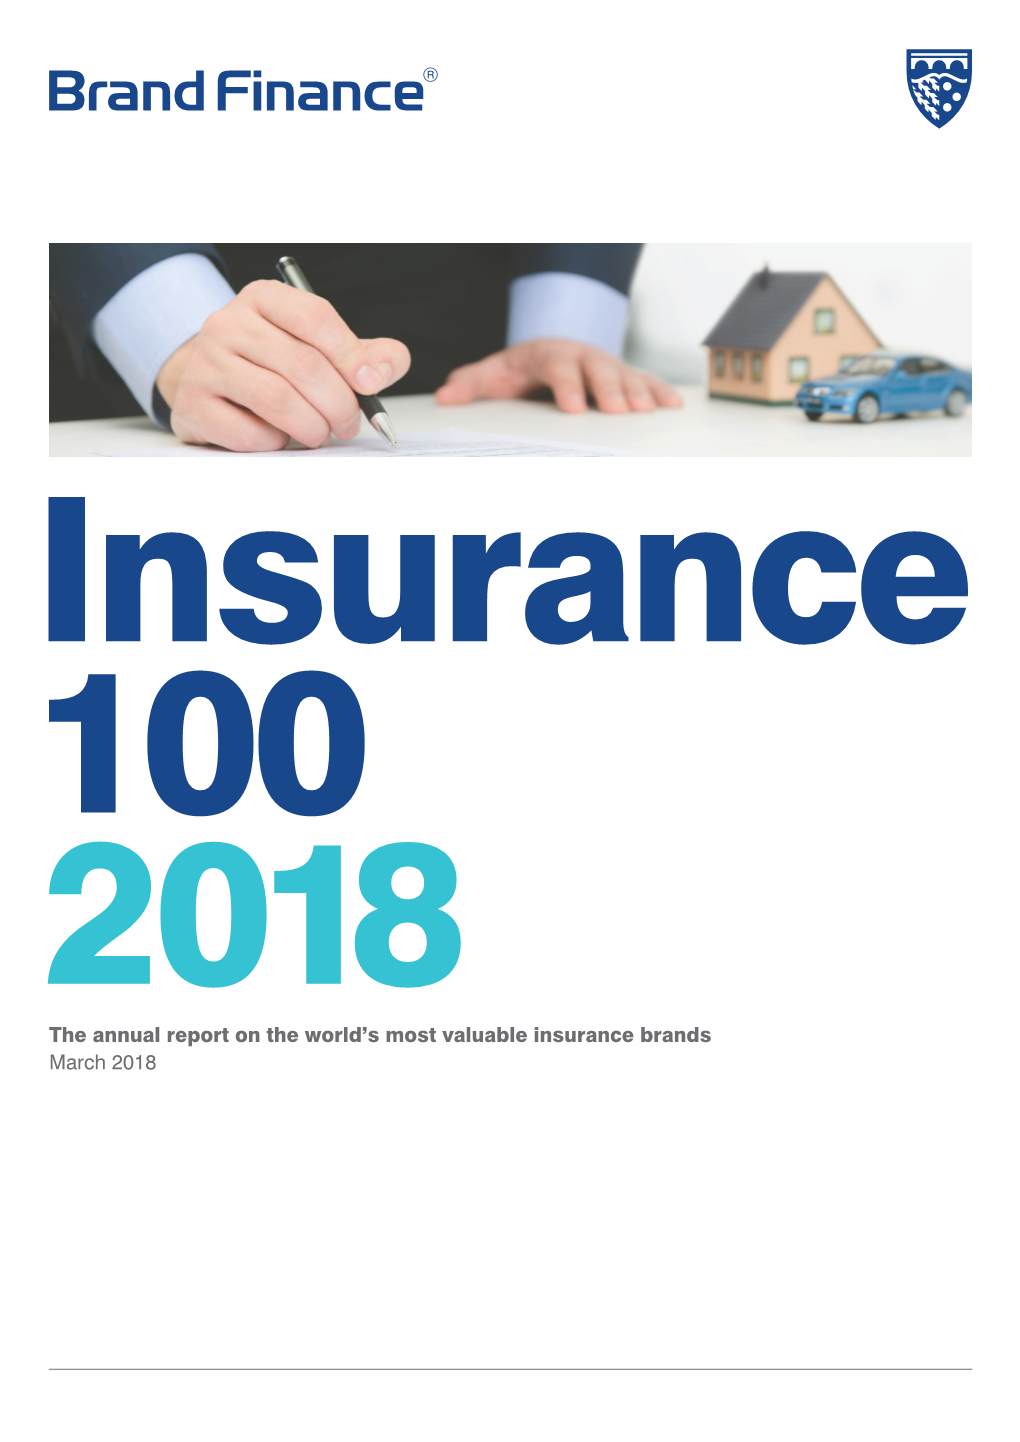 The Annual Report on the World's Most Valuable Insurance Brands March